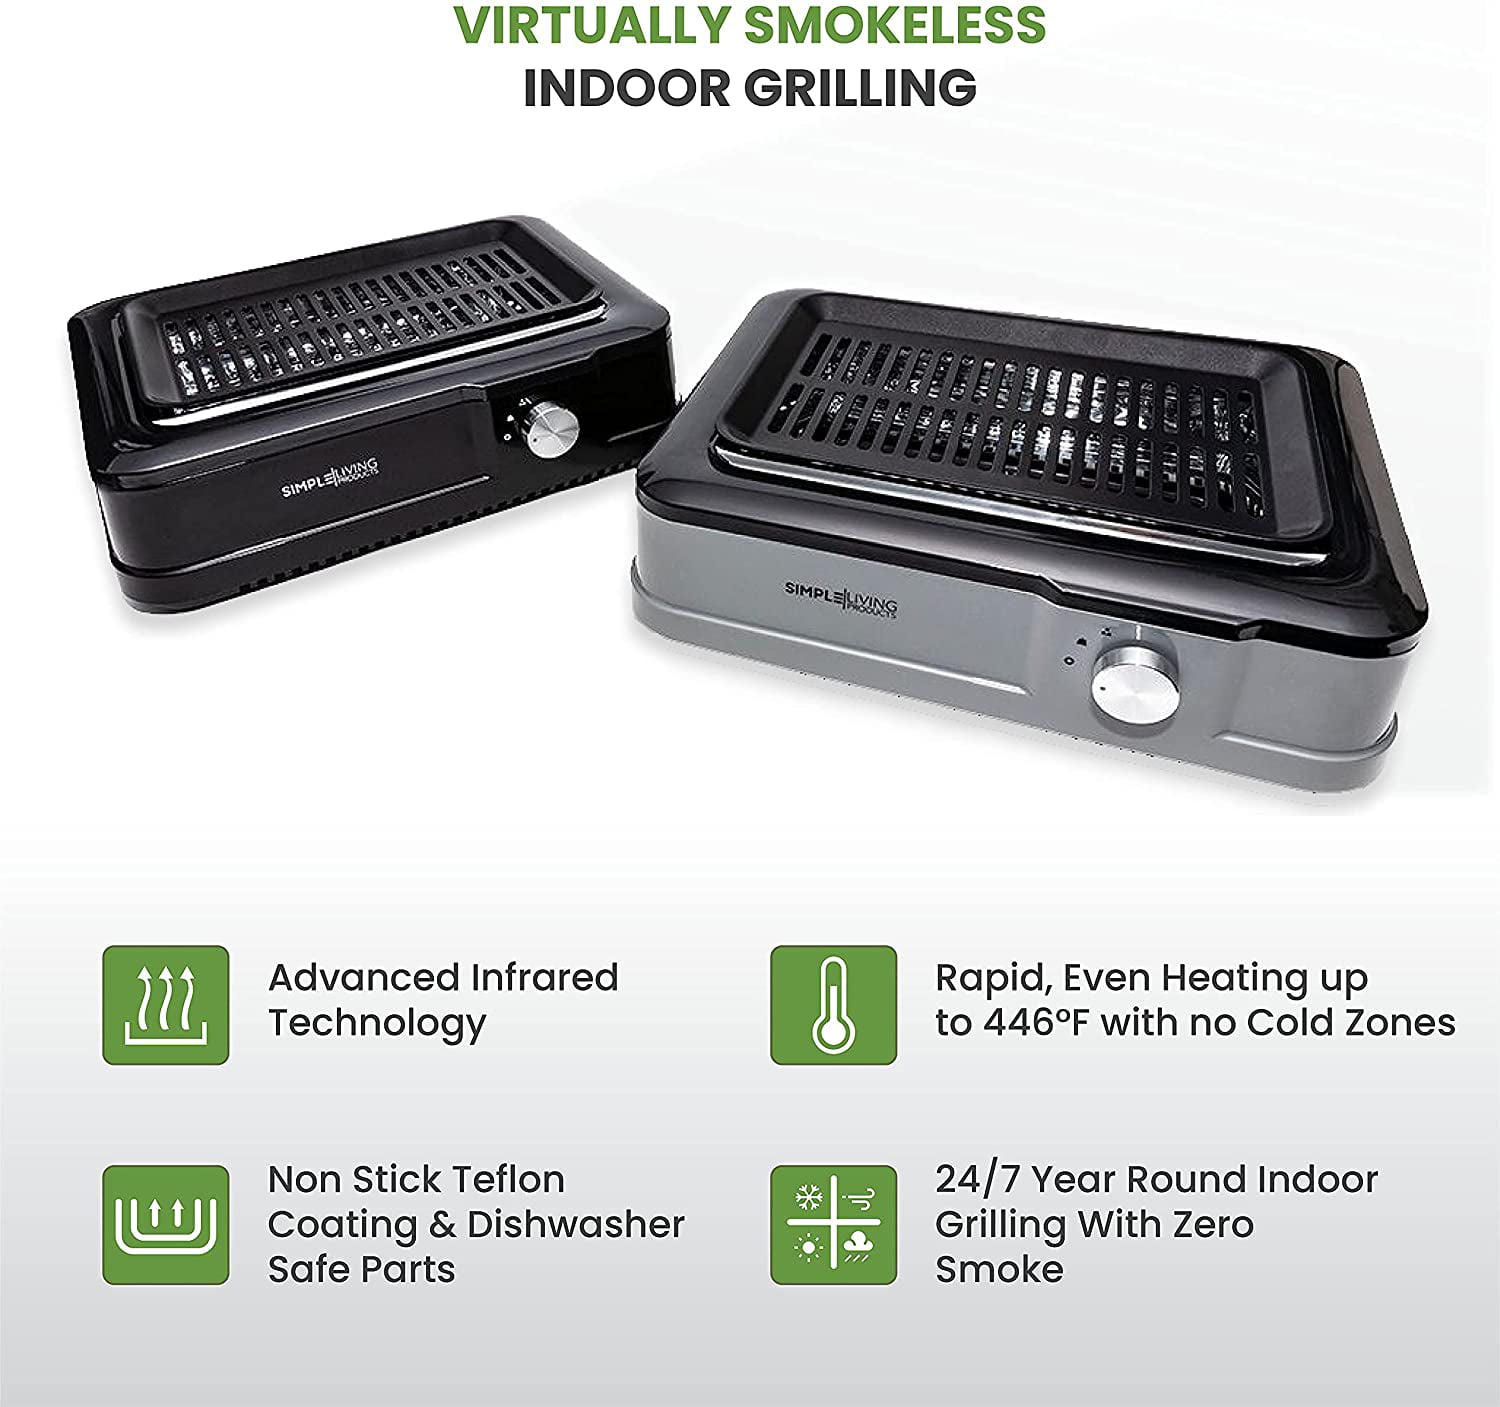 Indoor Electric Grills: How To Use & Caring For Your Grill - Innoteck